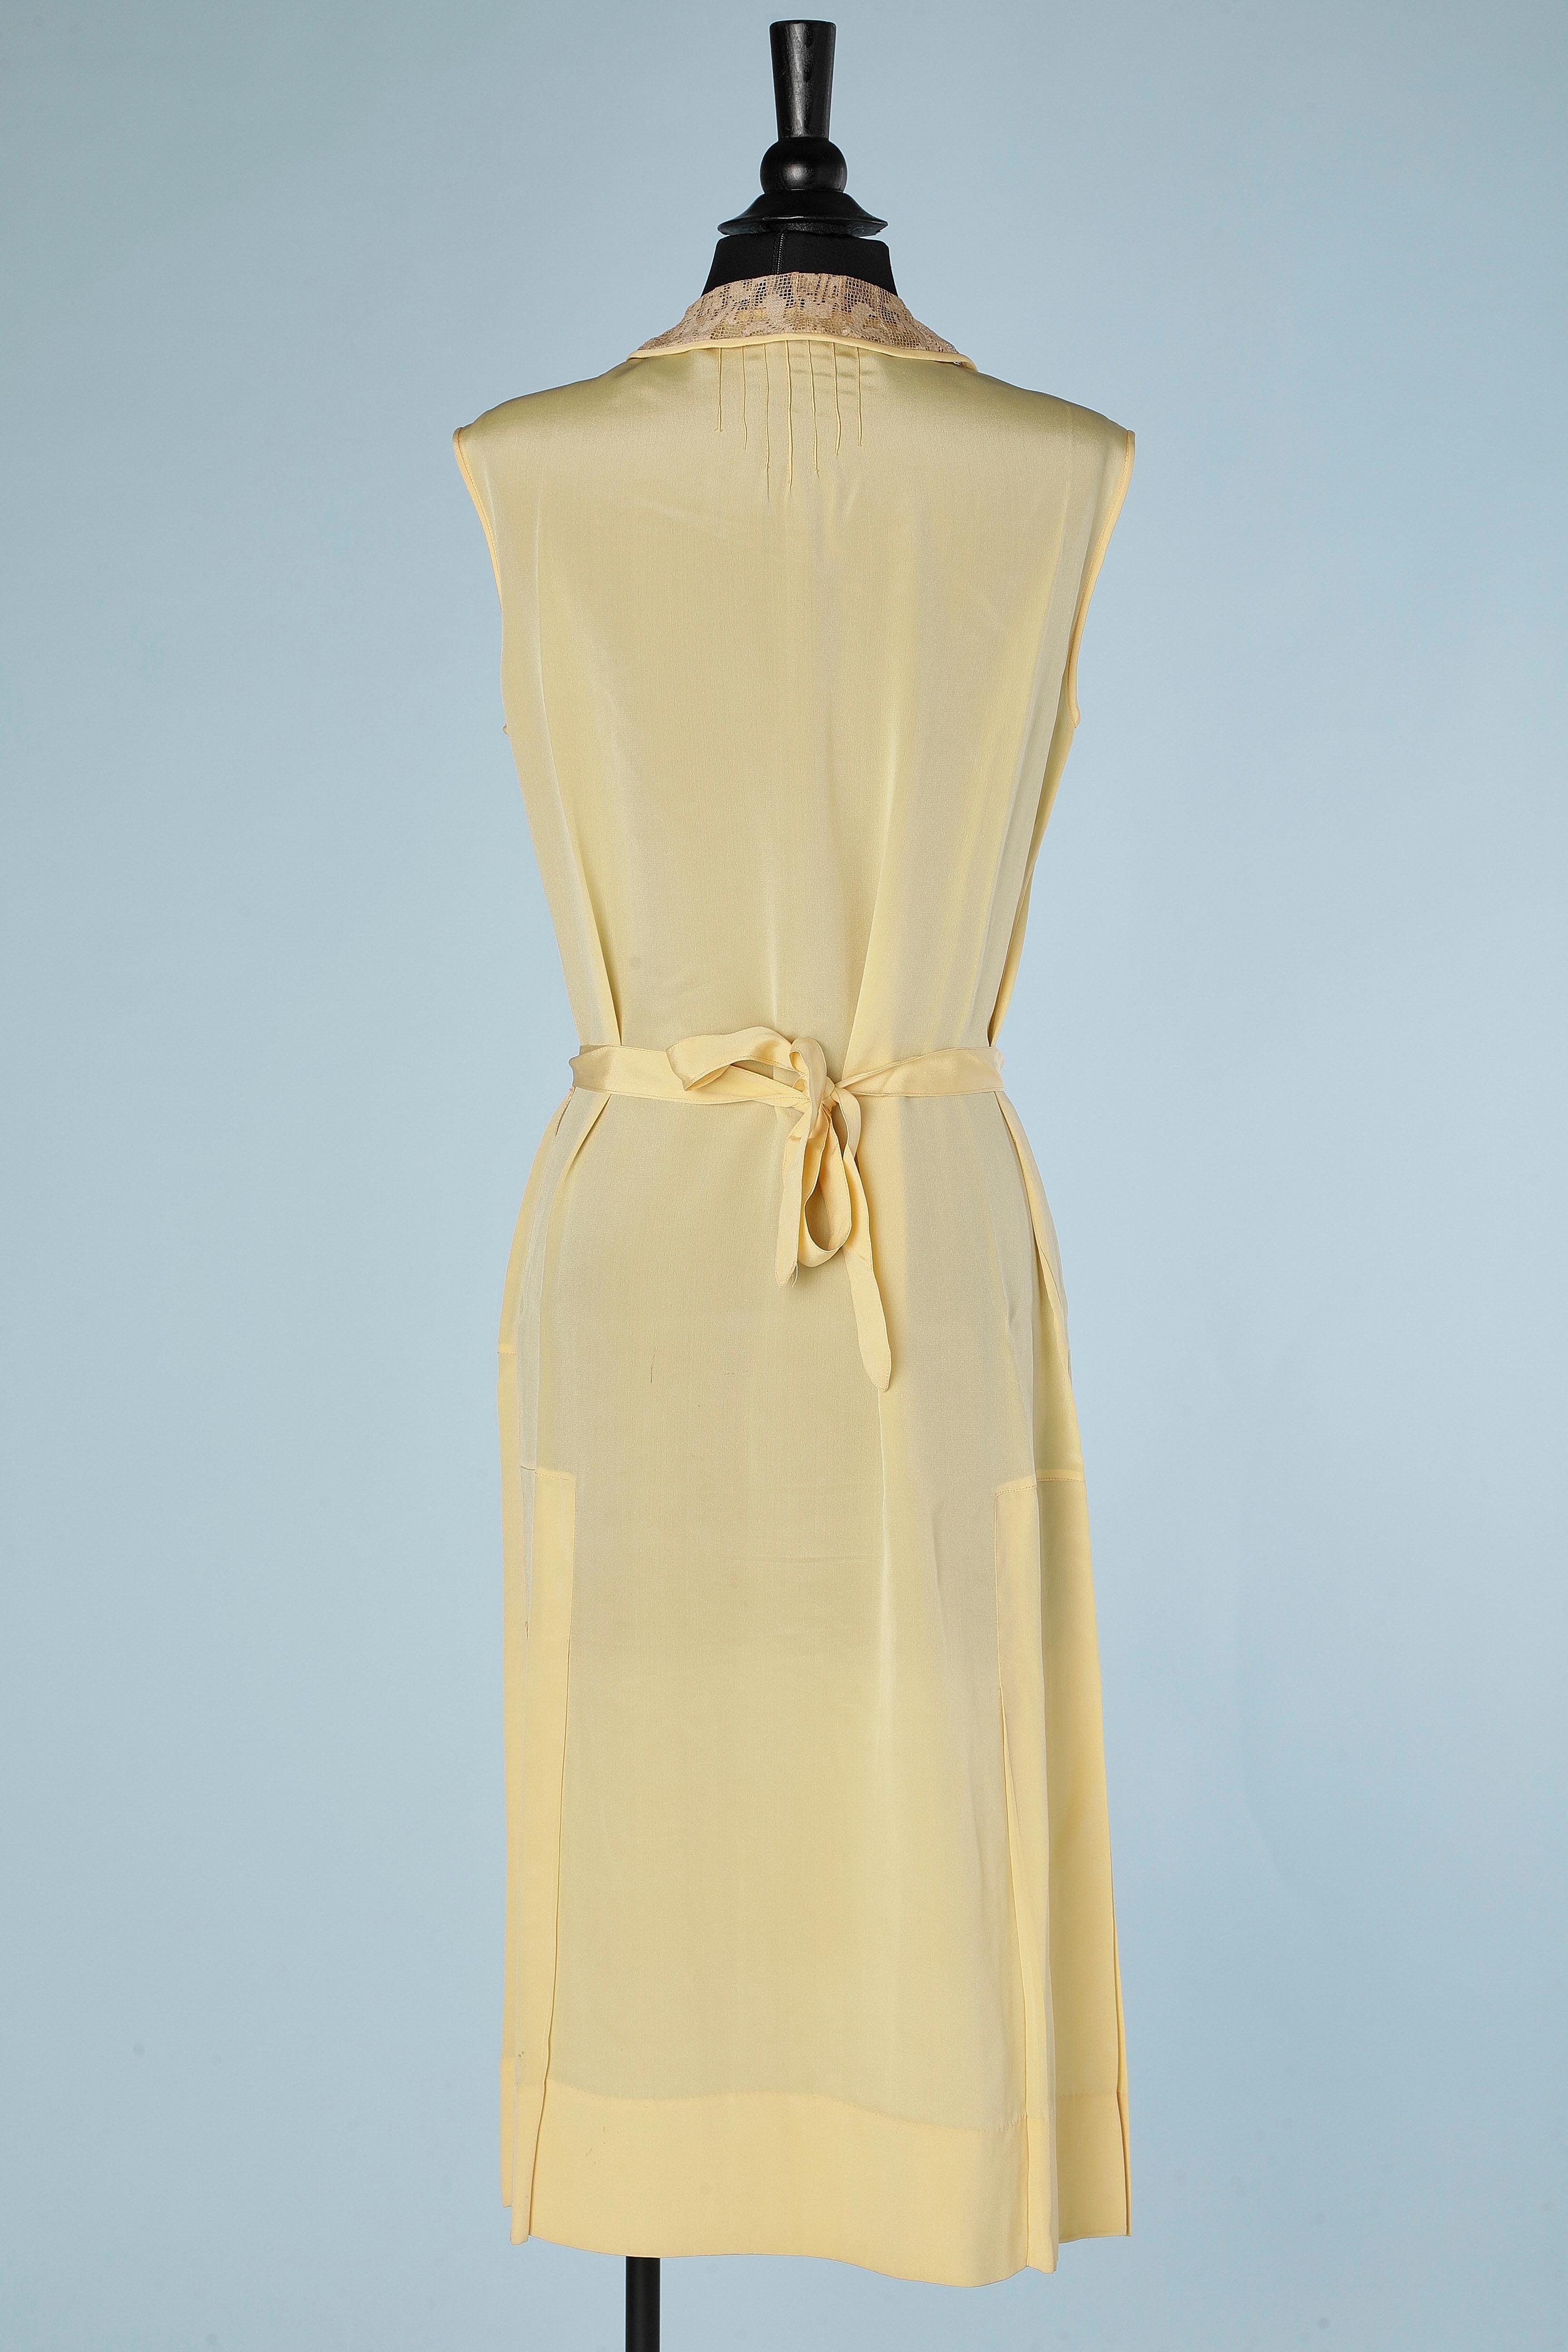 White Pale yellow silk dress with lace appliqué and ivory silk thread Circa 1920